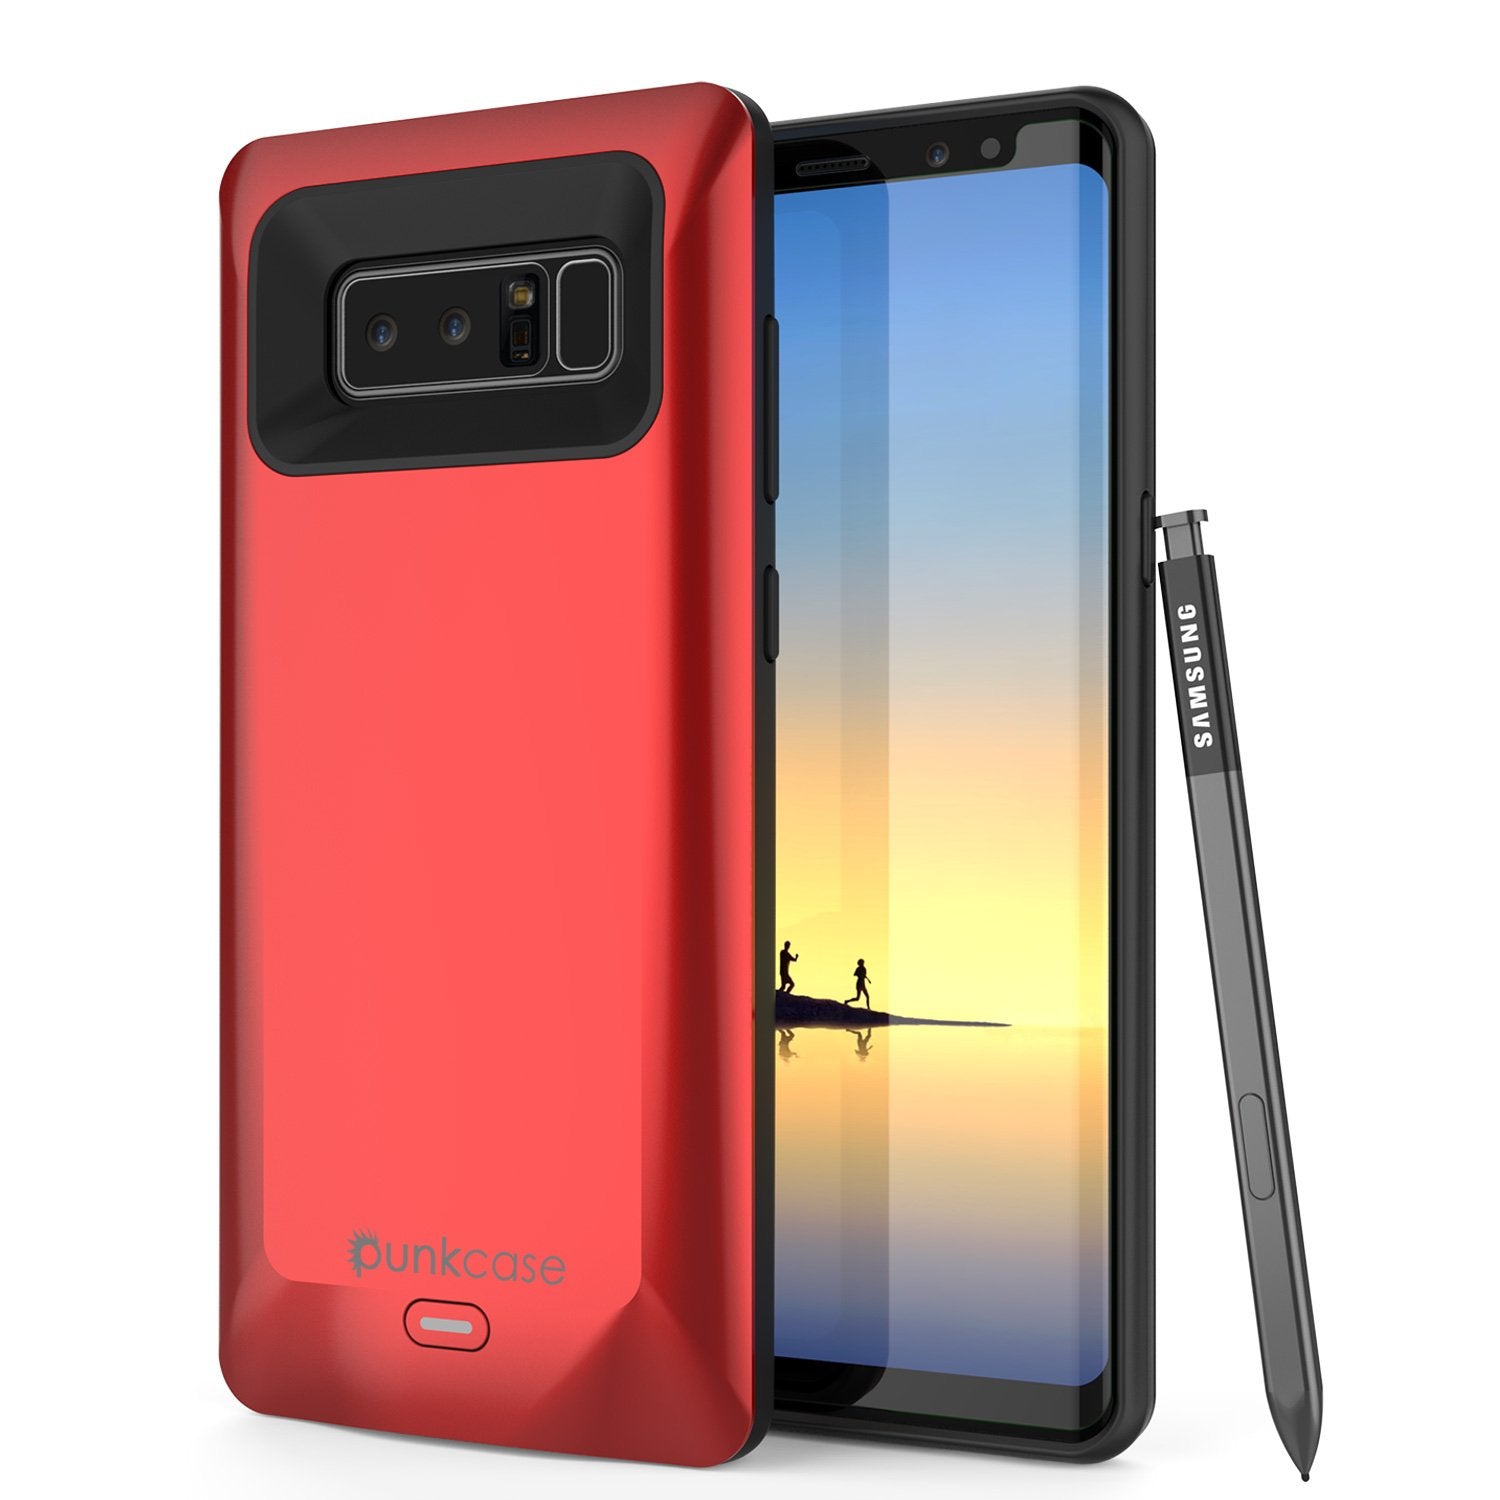 Galaxy Note 8 Battery Case, Punkcase 5000mAH Charger Case W/ Screen Protector | Integrated USB Port | IntelSwitch [Red]